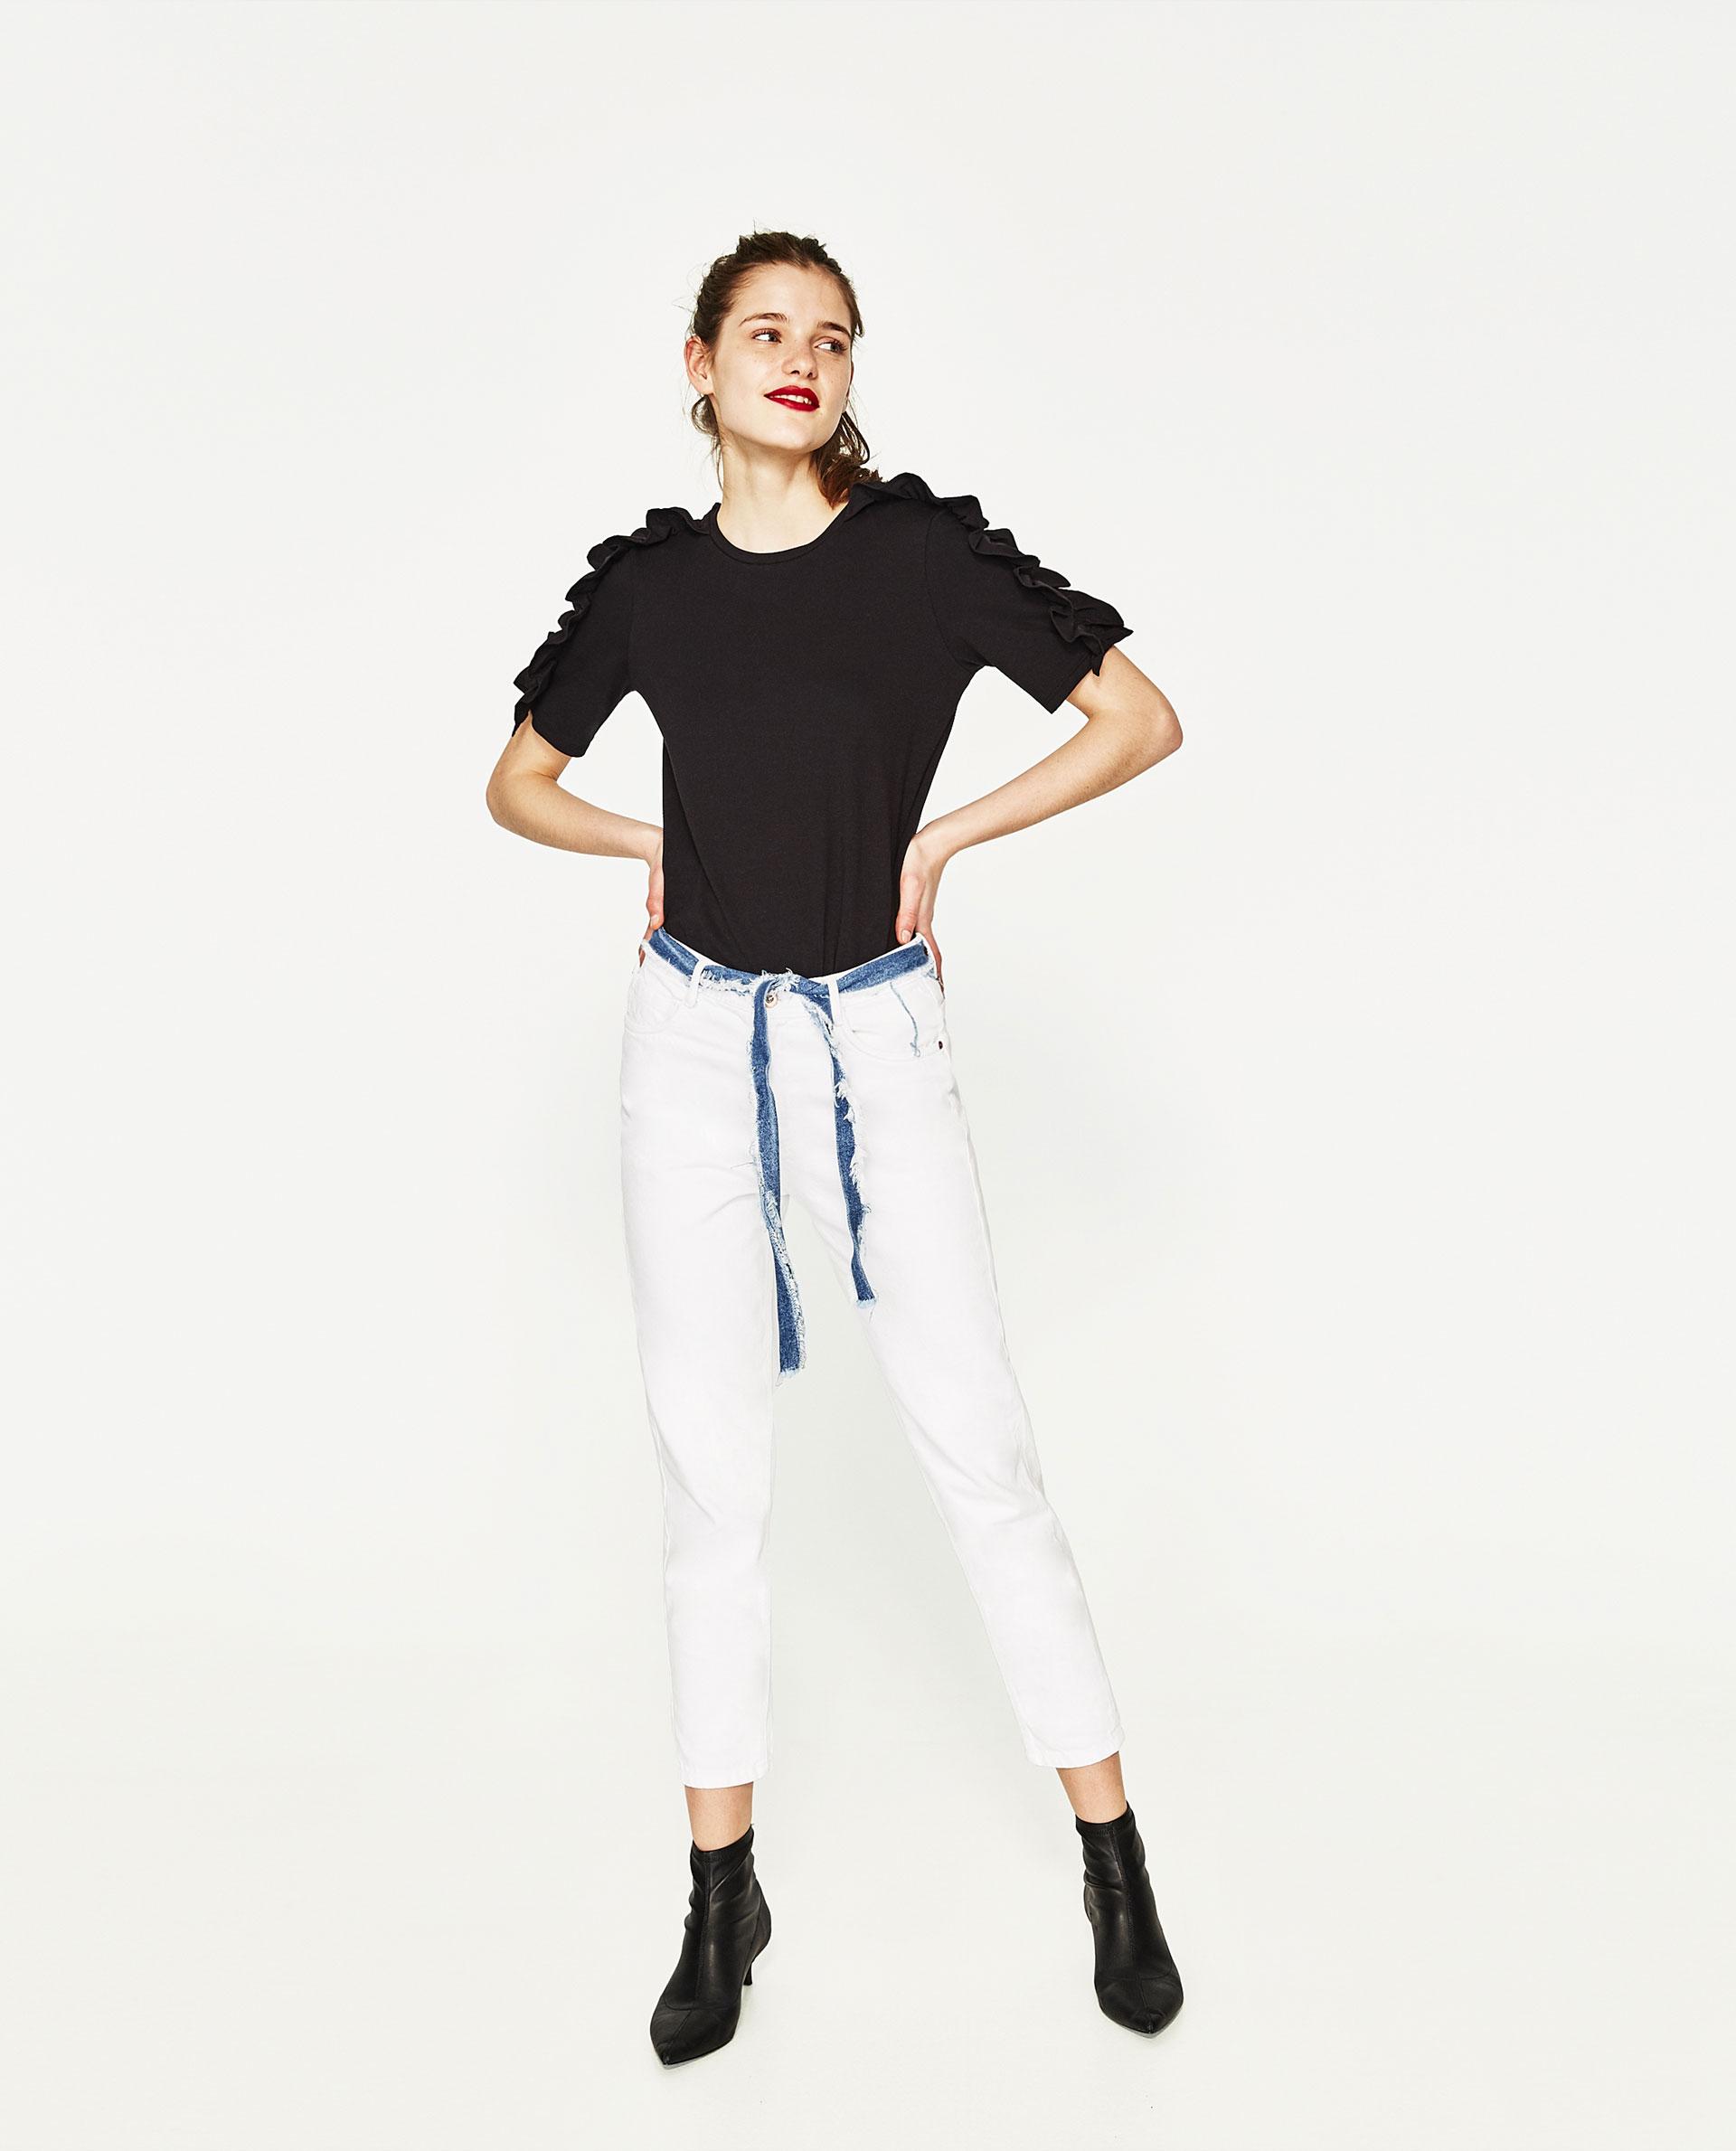 Zara T-shirt With Shoulder Frill in Black | Lyst